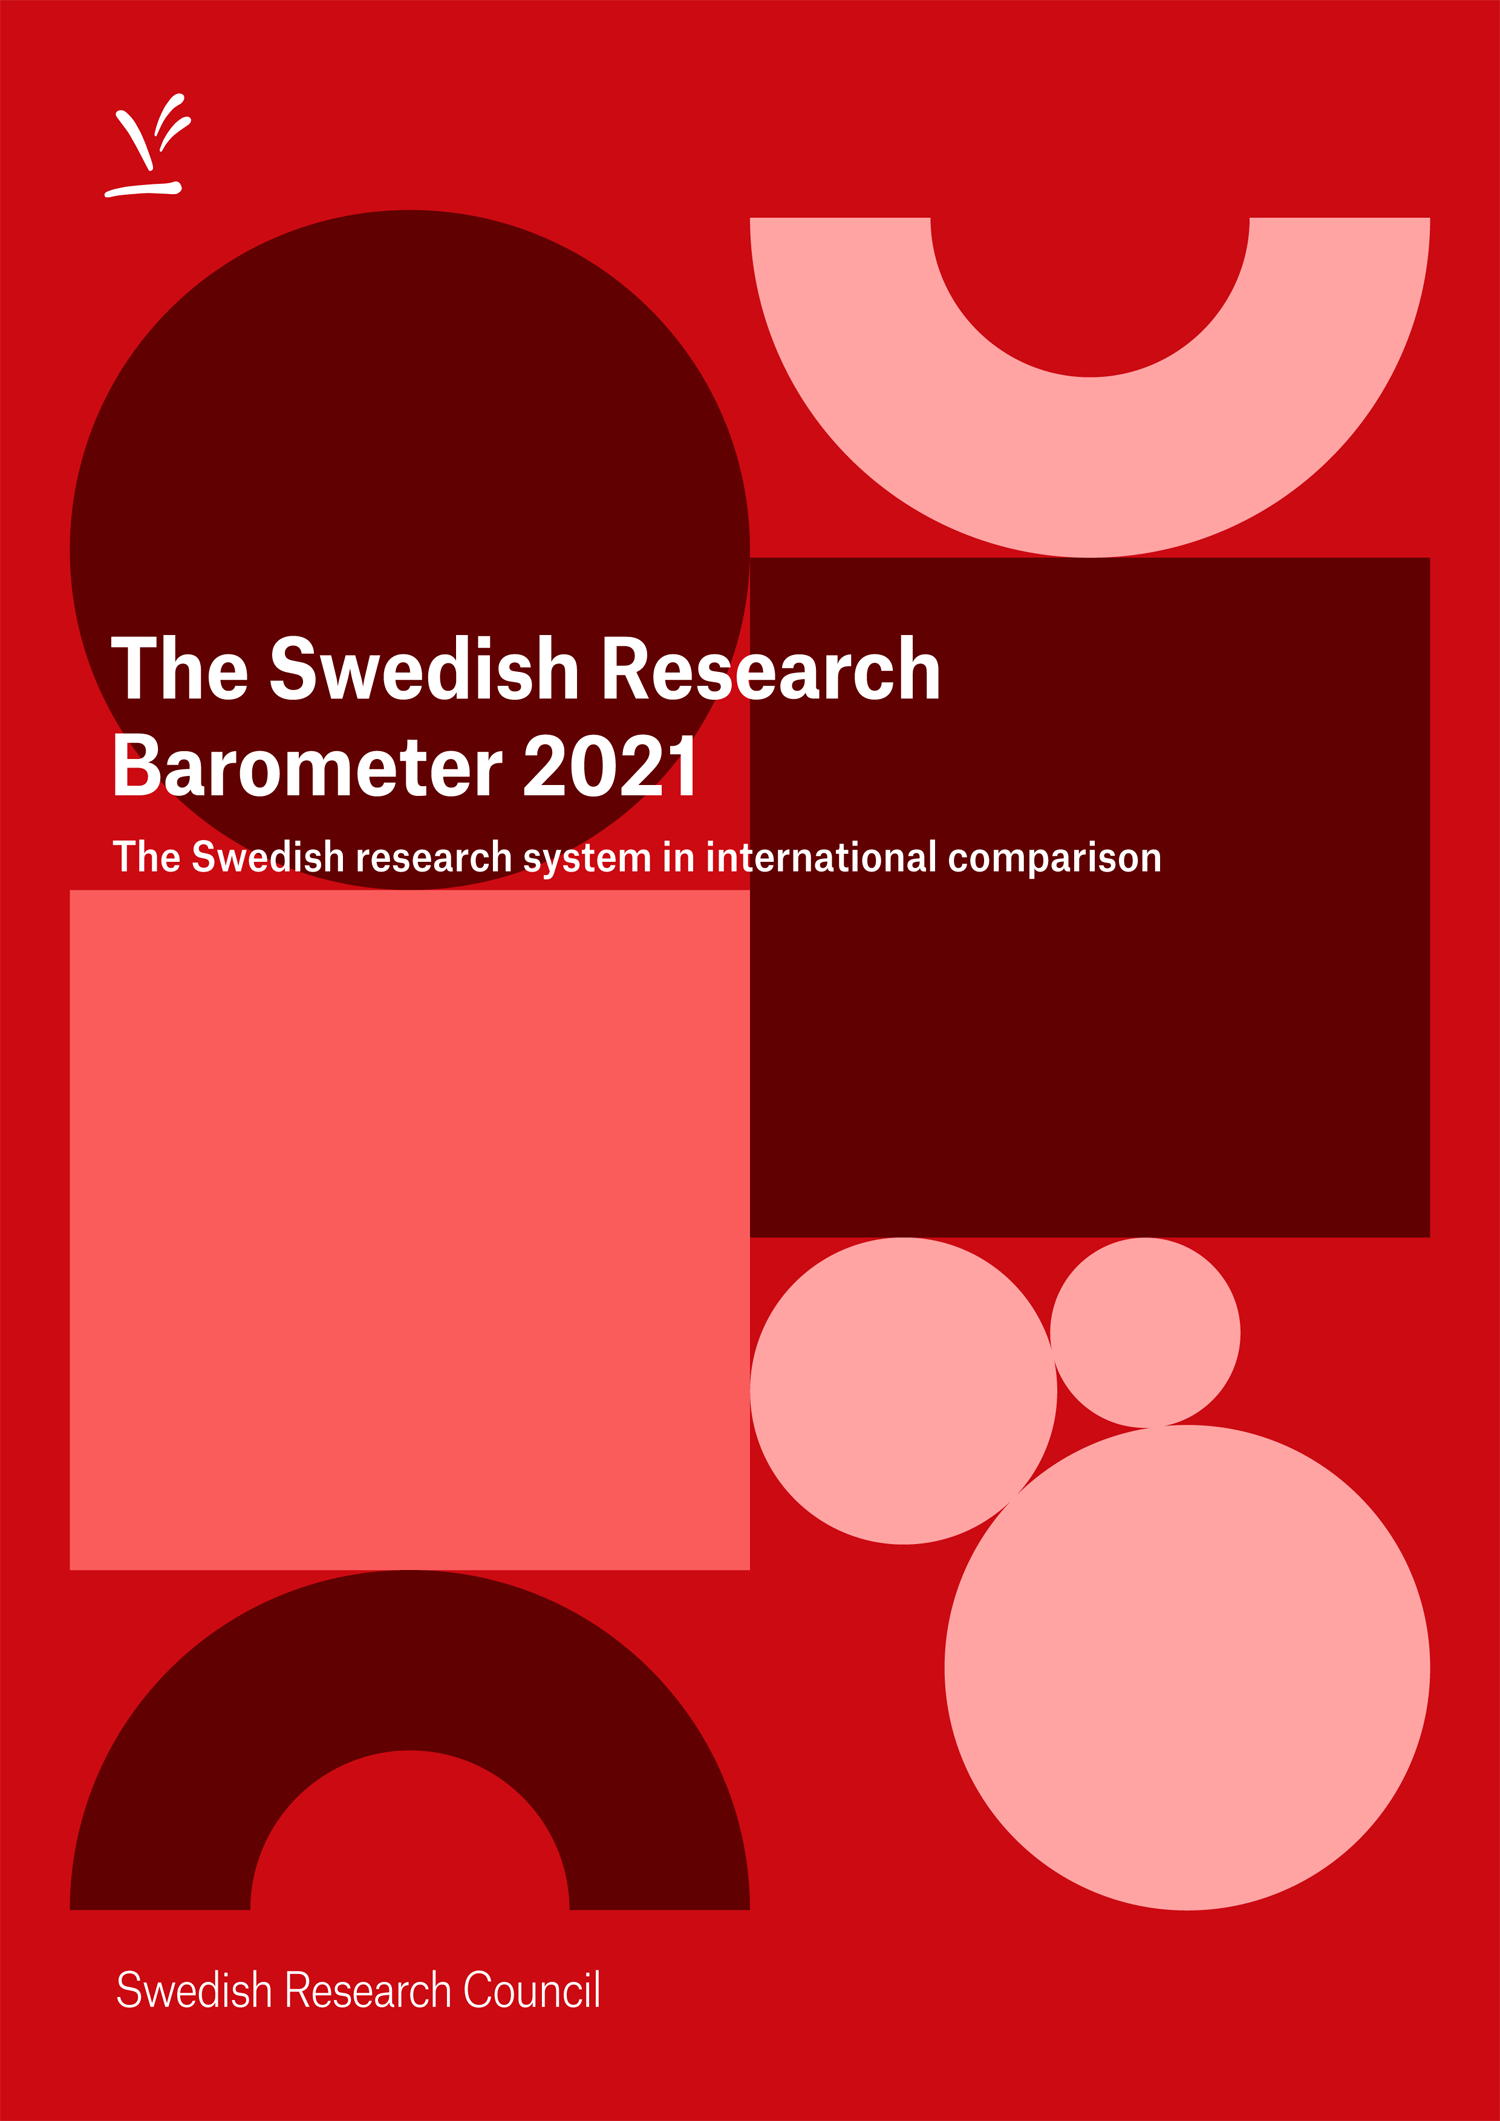 Cover of the report The Swedish Research Barometer 2021.